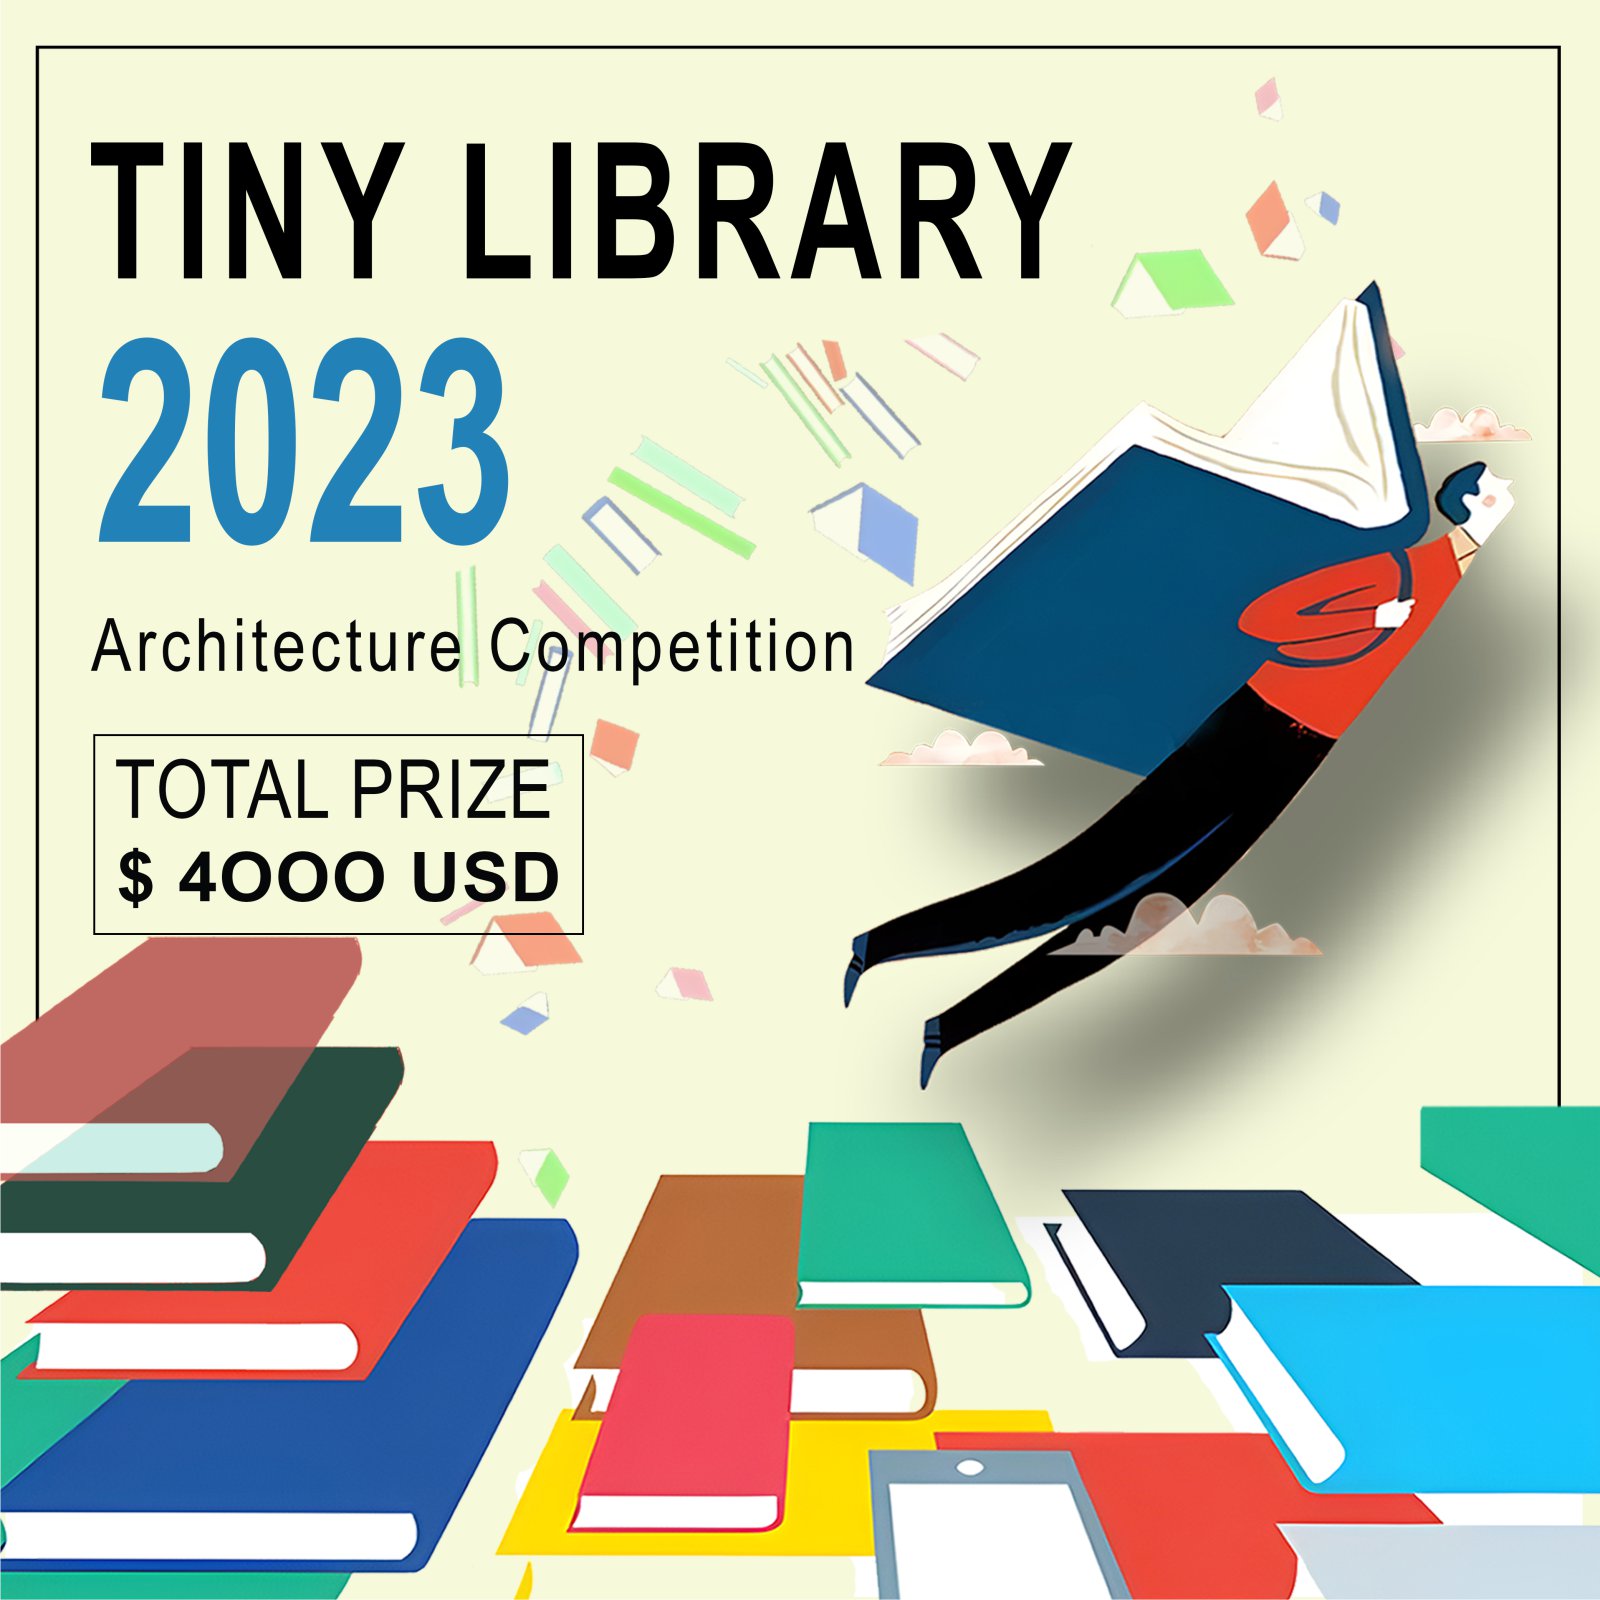 Tiny Library 2023 Architecture Competition 05 